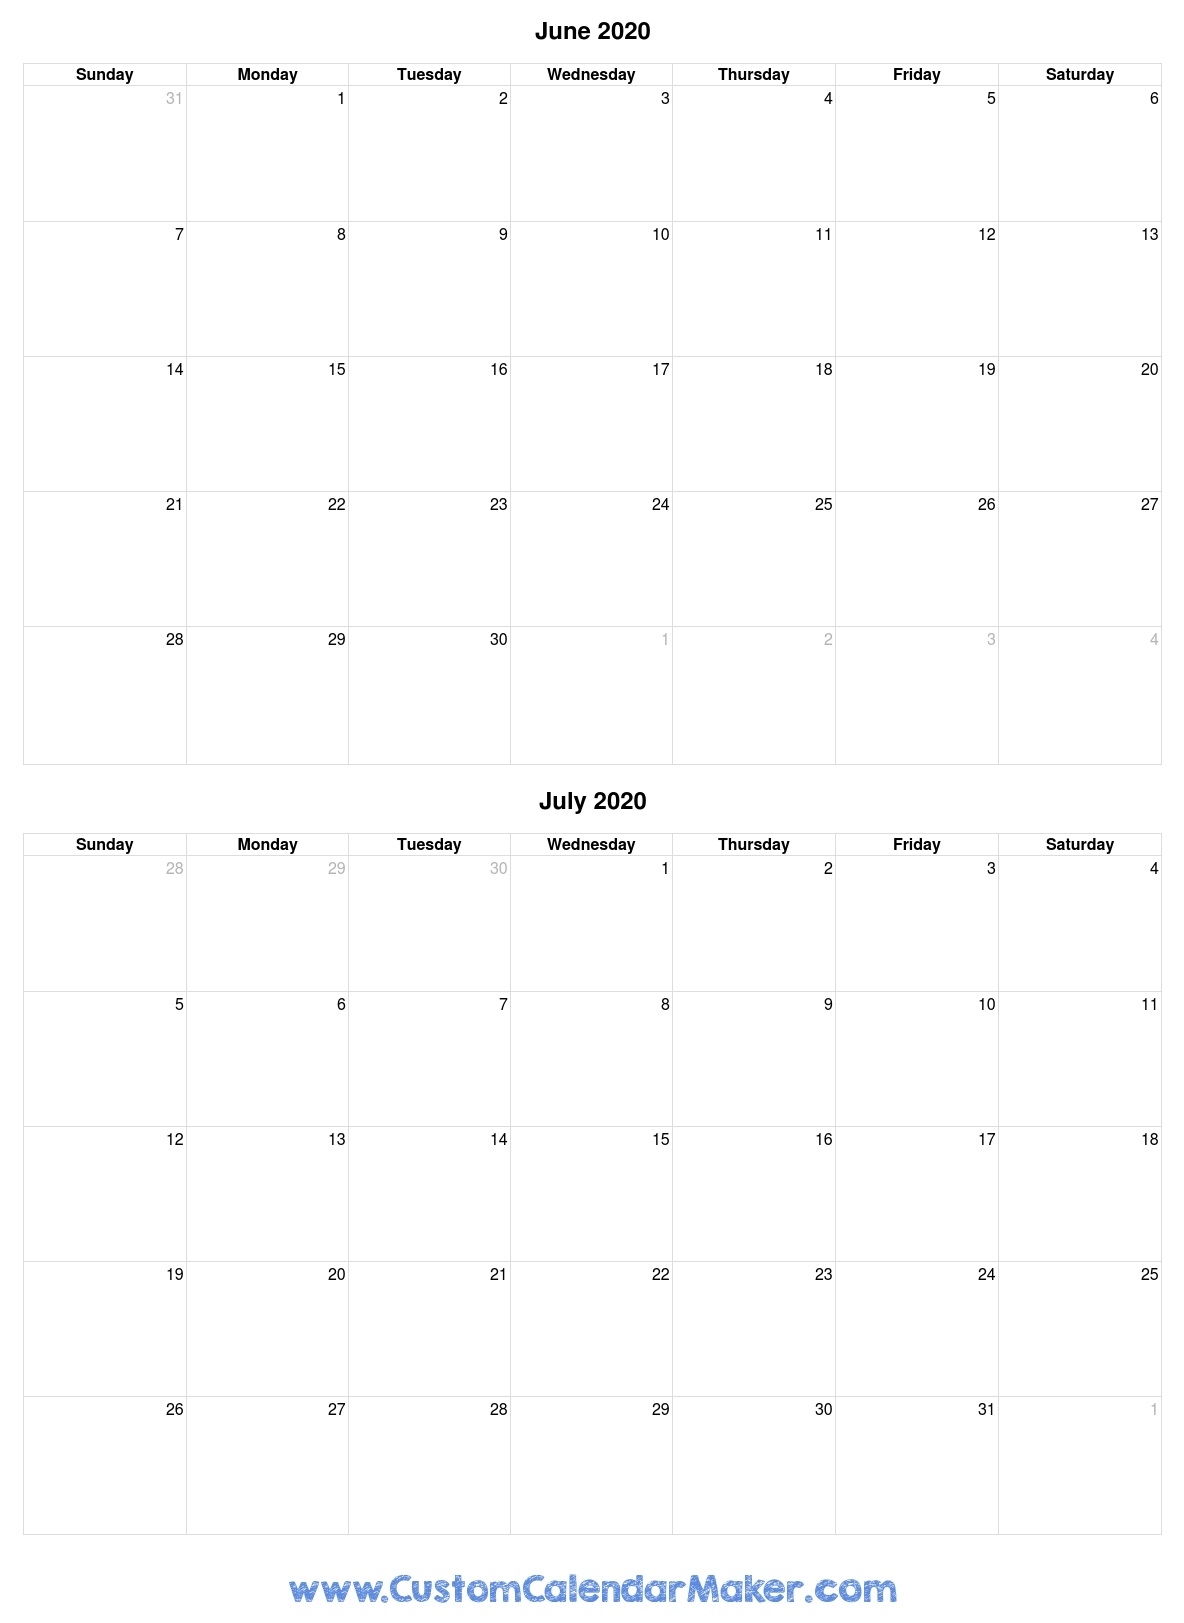 Get 2021 Calendar Two Months Per Page